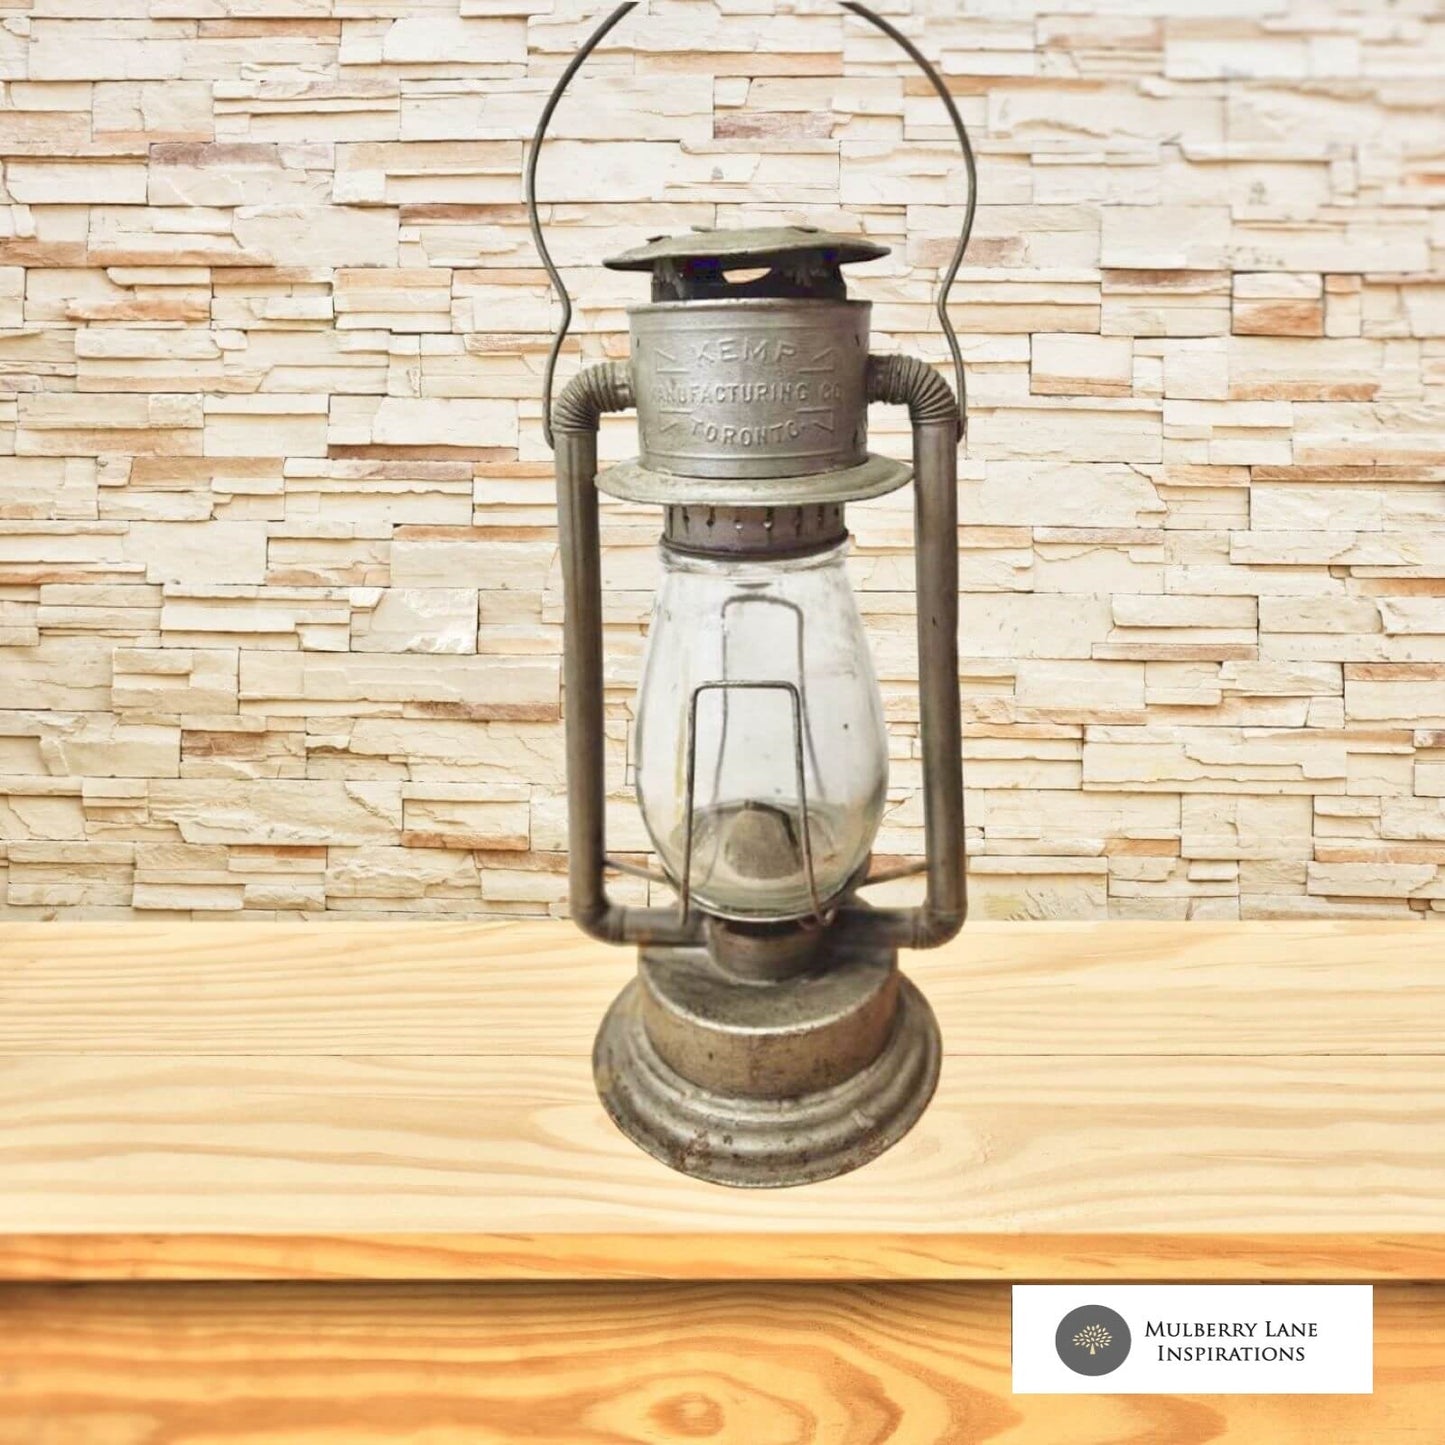 An antique lantern sits on a rustic wooden table, emanating a warm glow in a dimly lit room.